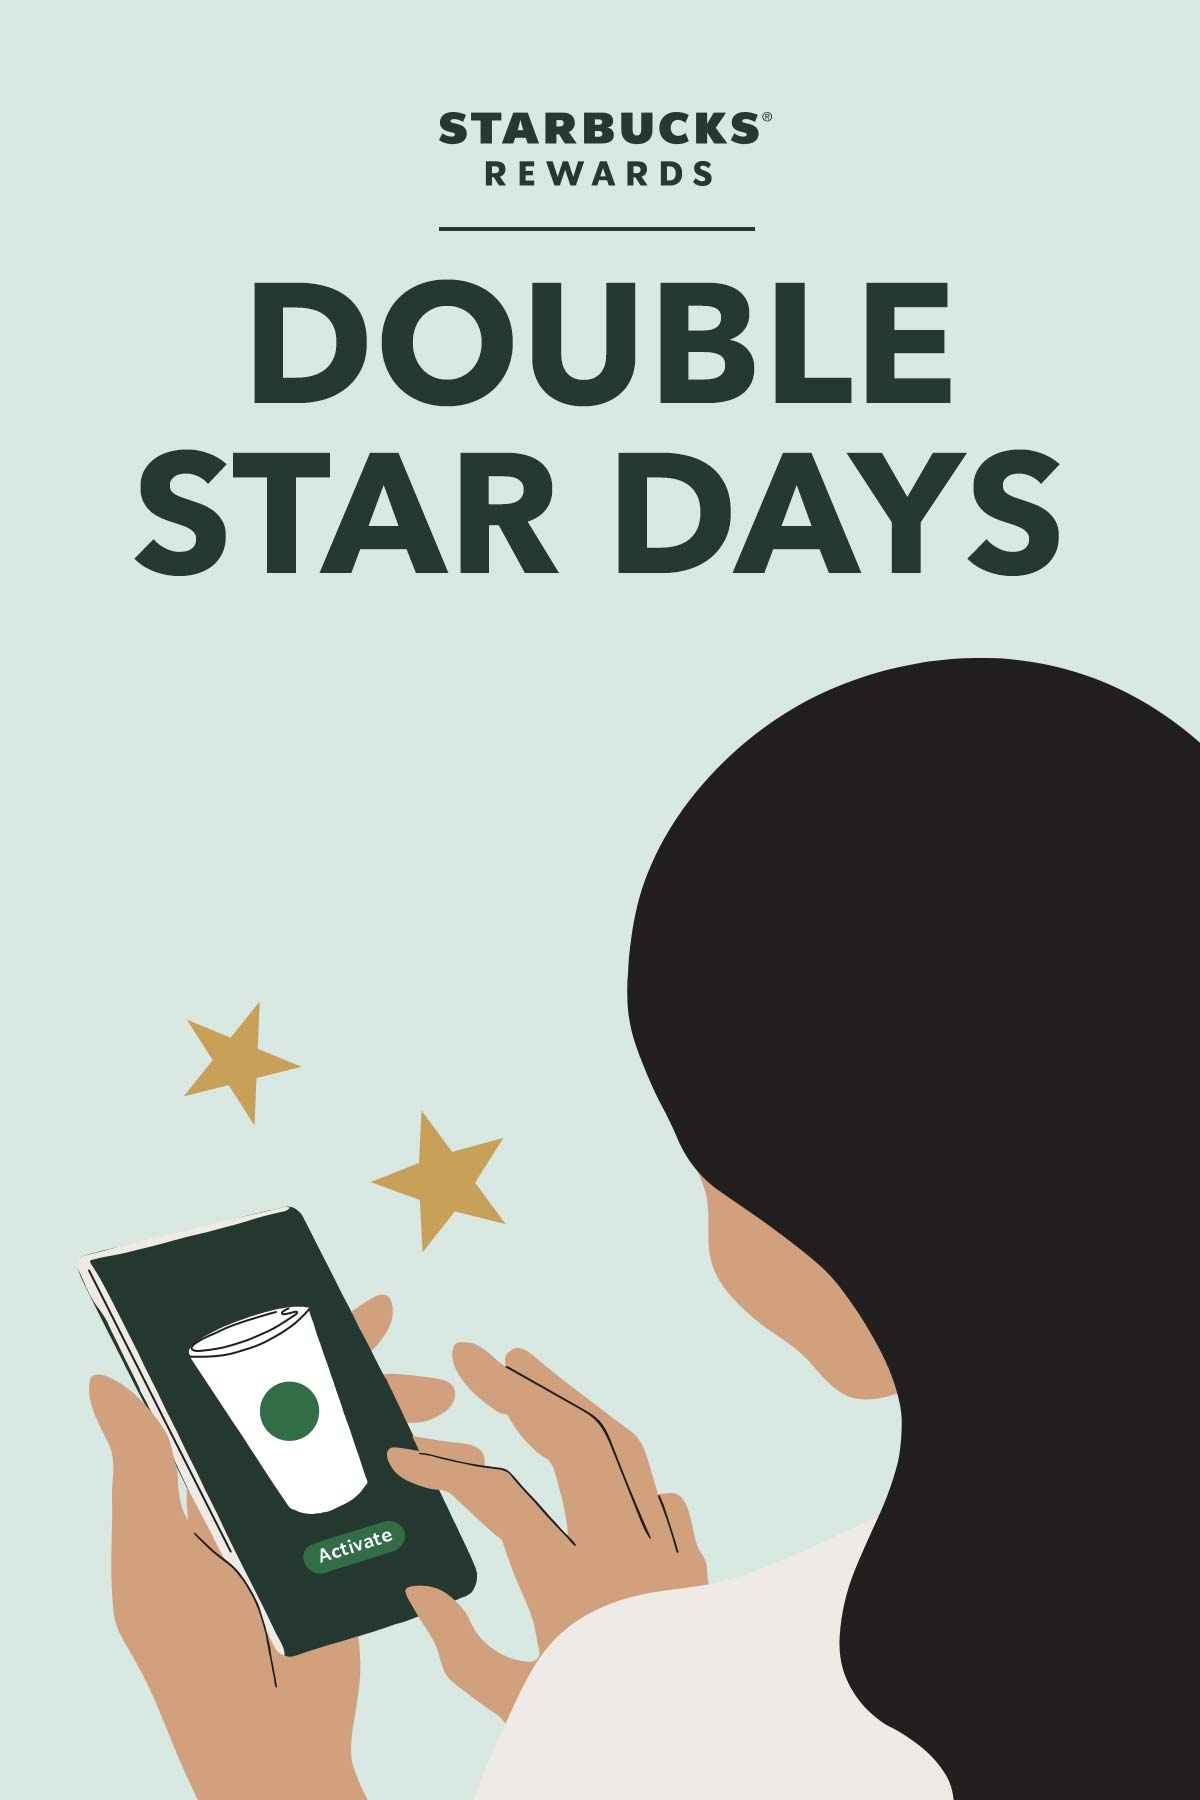 Double Star Days text with Starbucks logo and illustration.